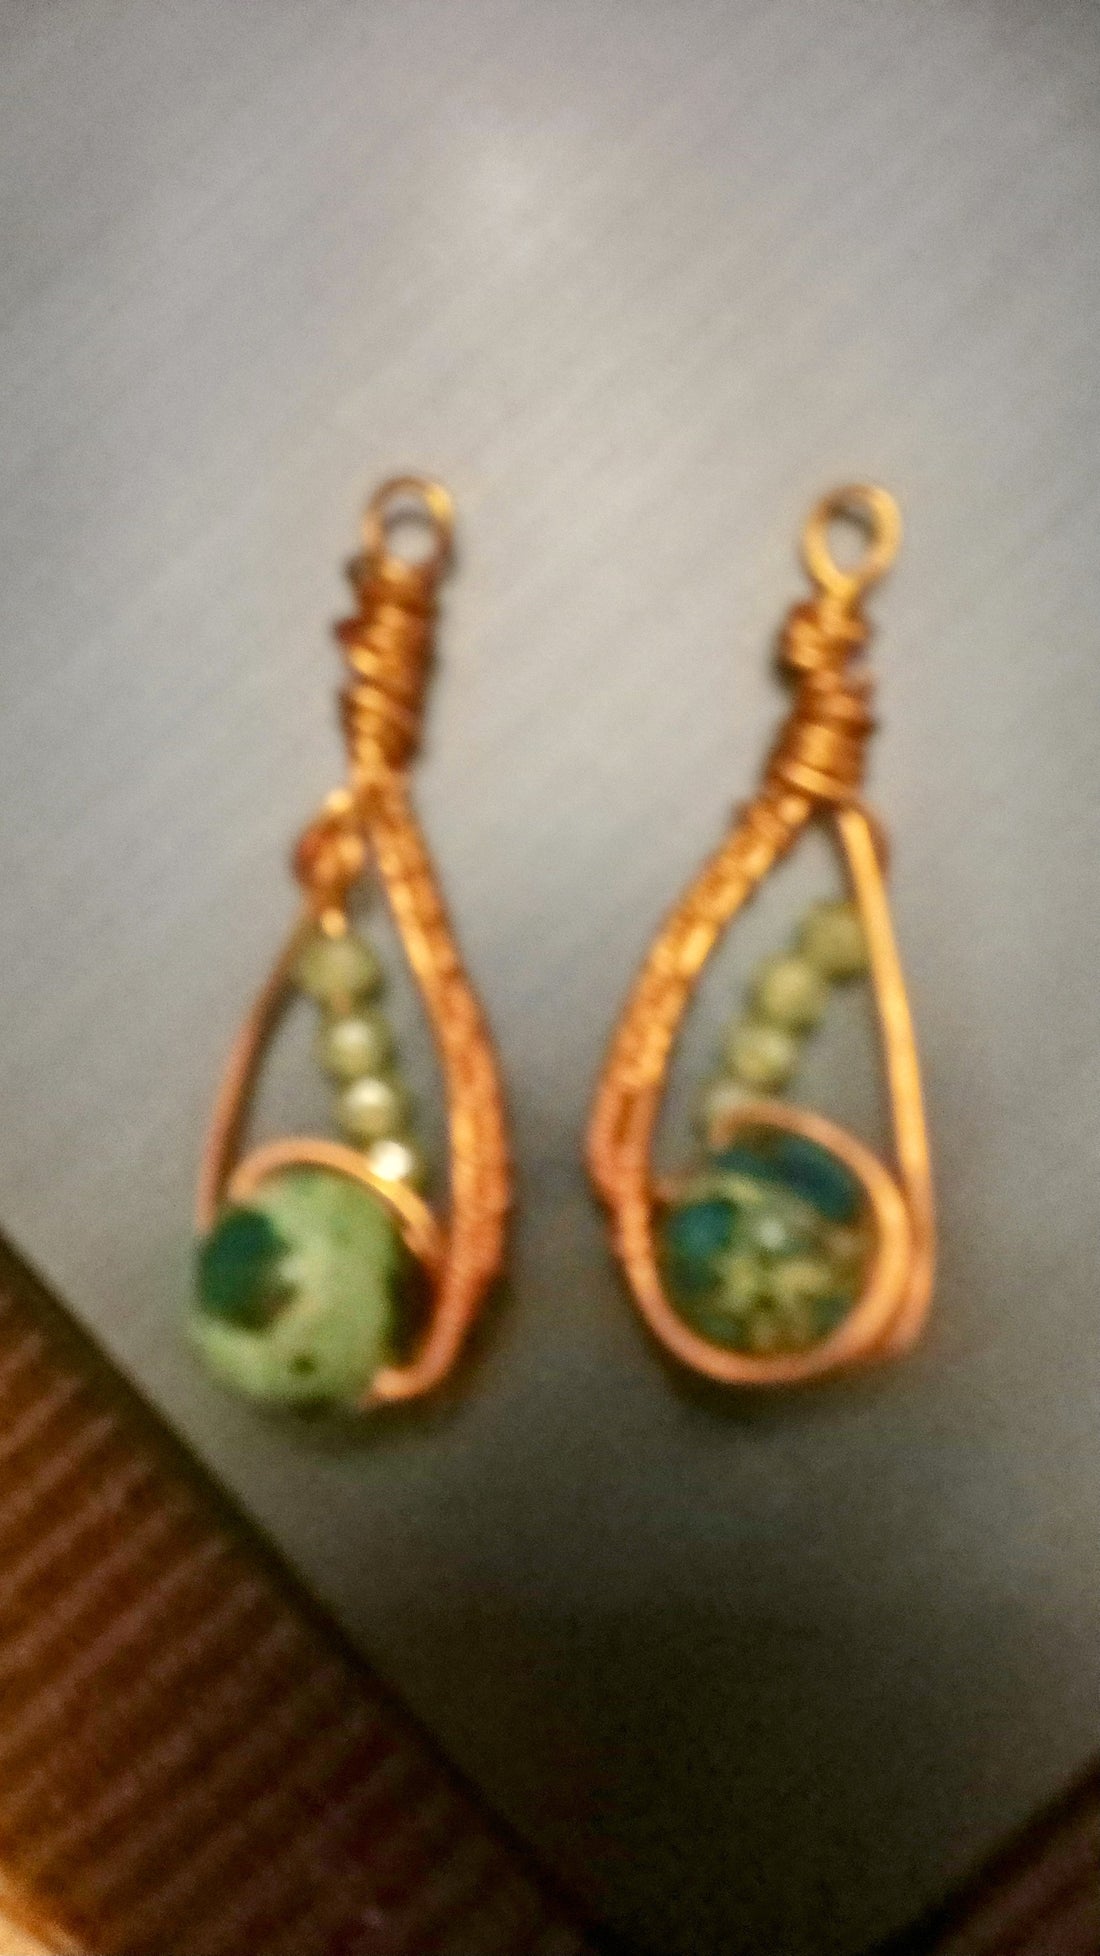 Learn how to wire wrap